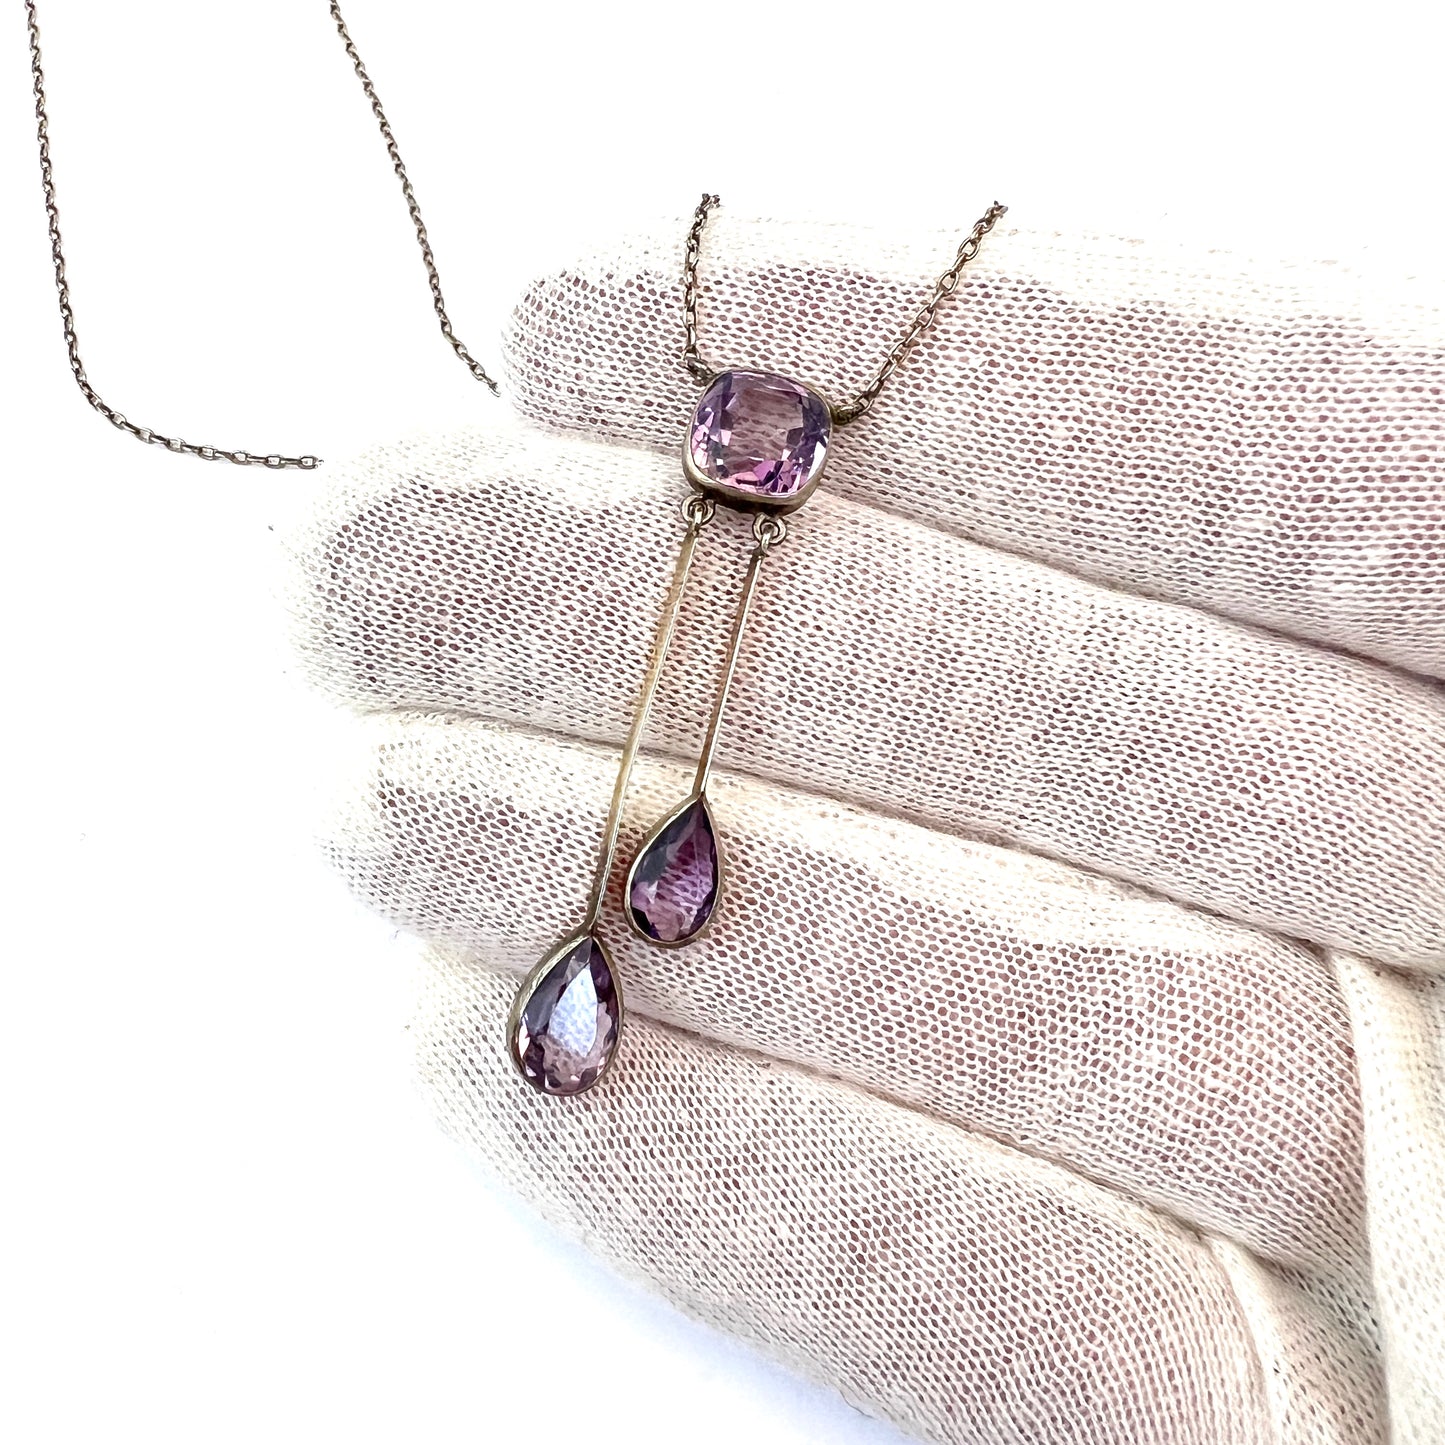 K.Andersson Sweden c 1920. Antique Solid Silver Amethyst Negligee Necklace